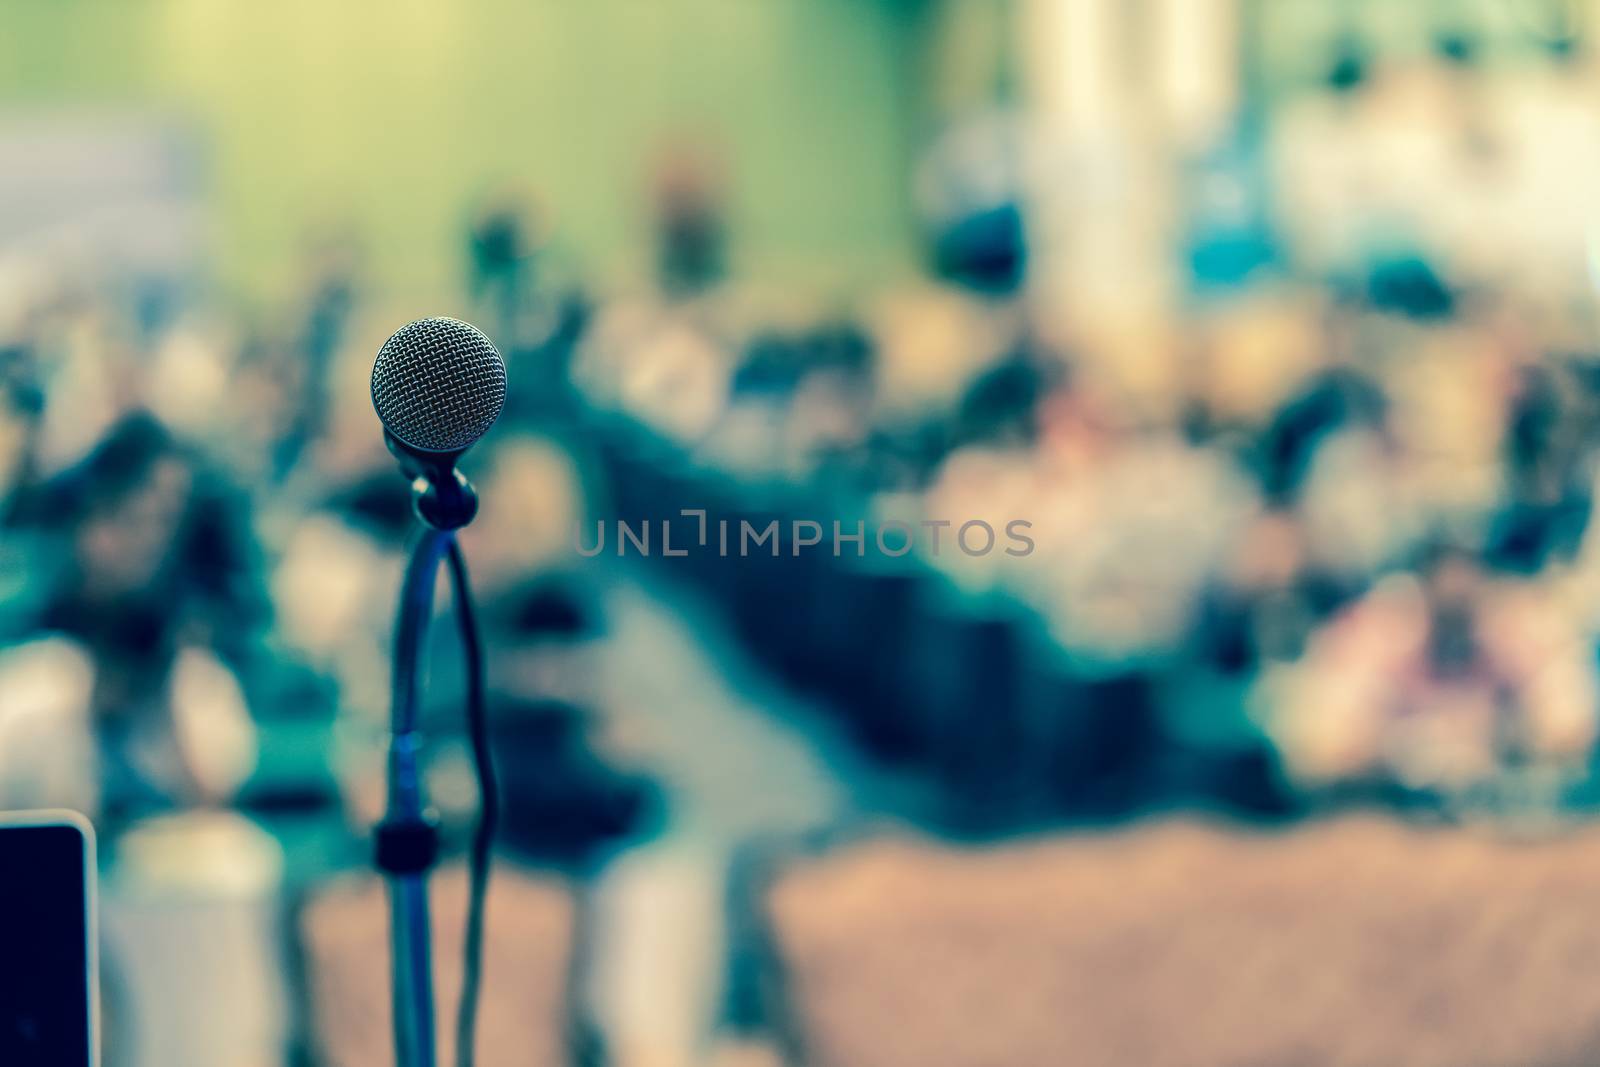 Microphone over the Abstract blurred photo of conference hall or seminar room with audience background, education and learning concept